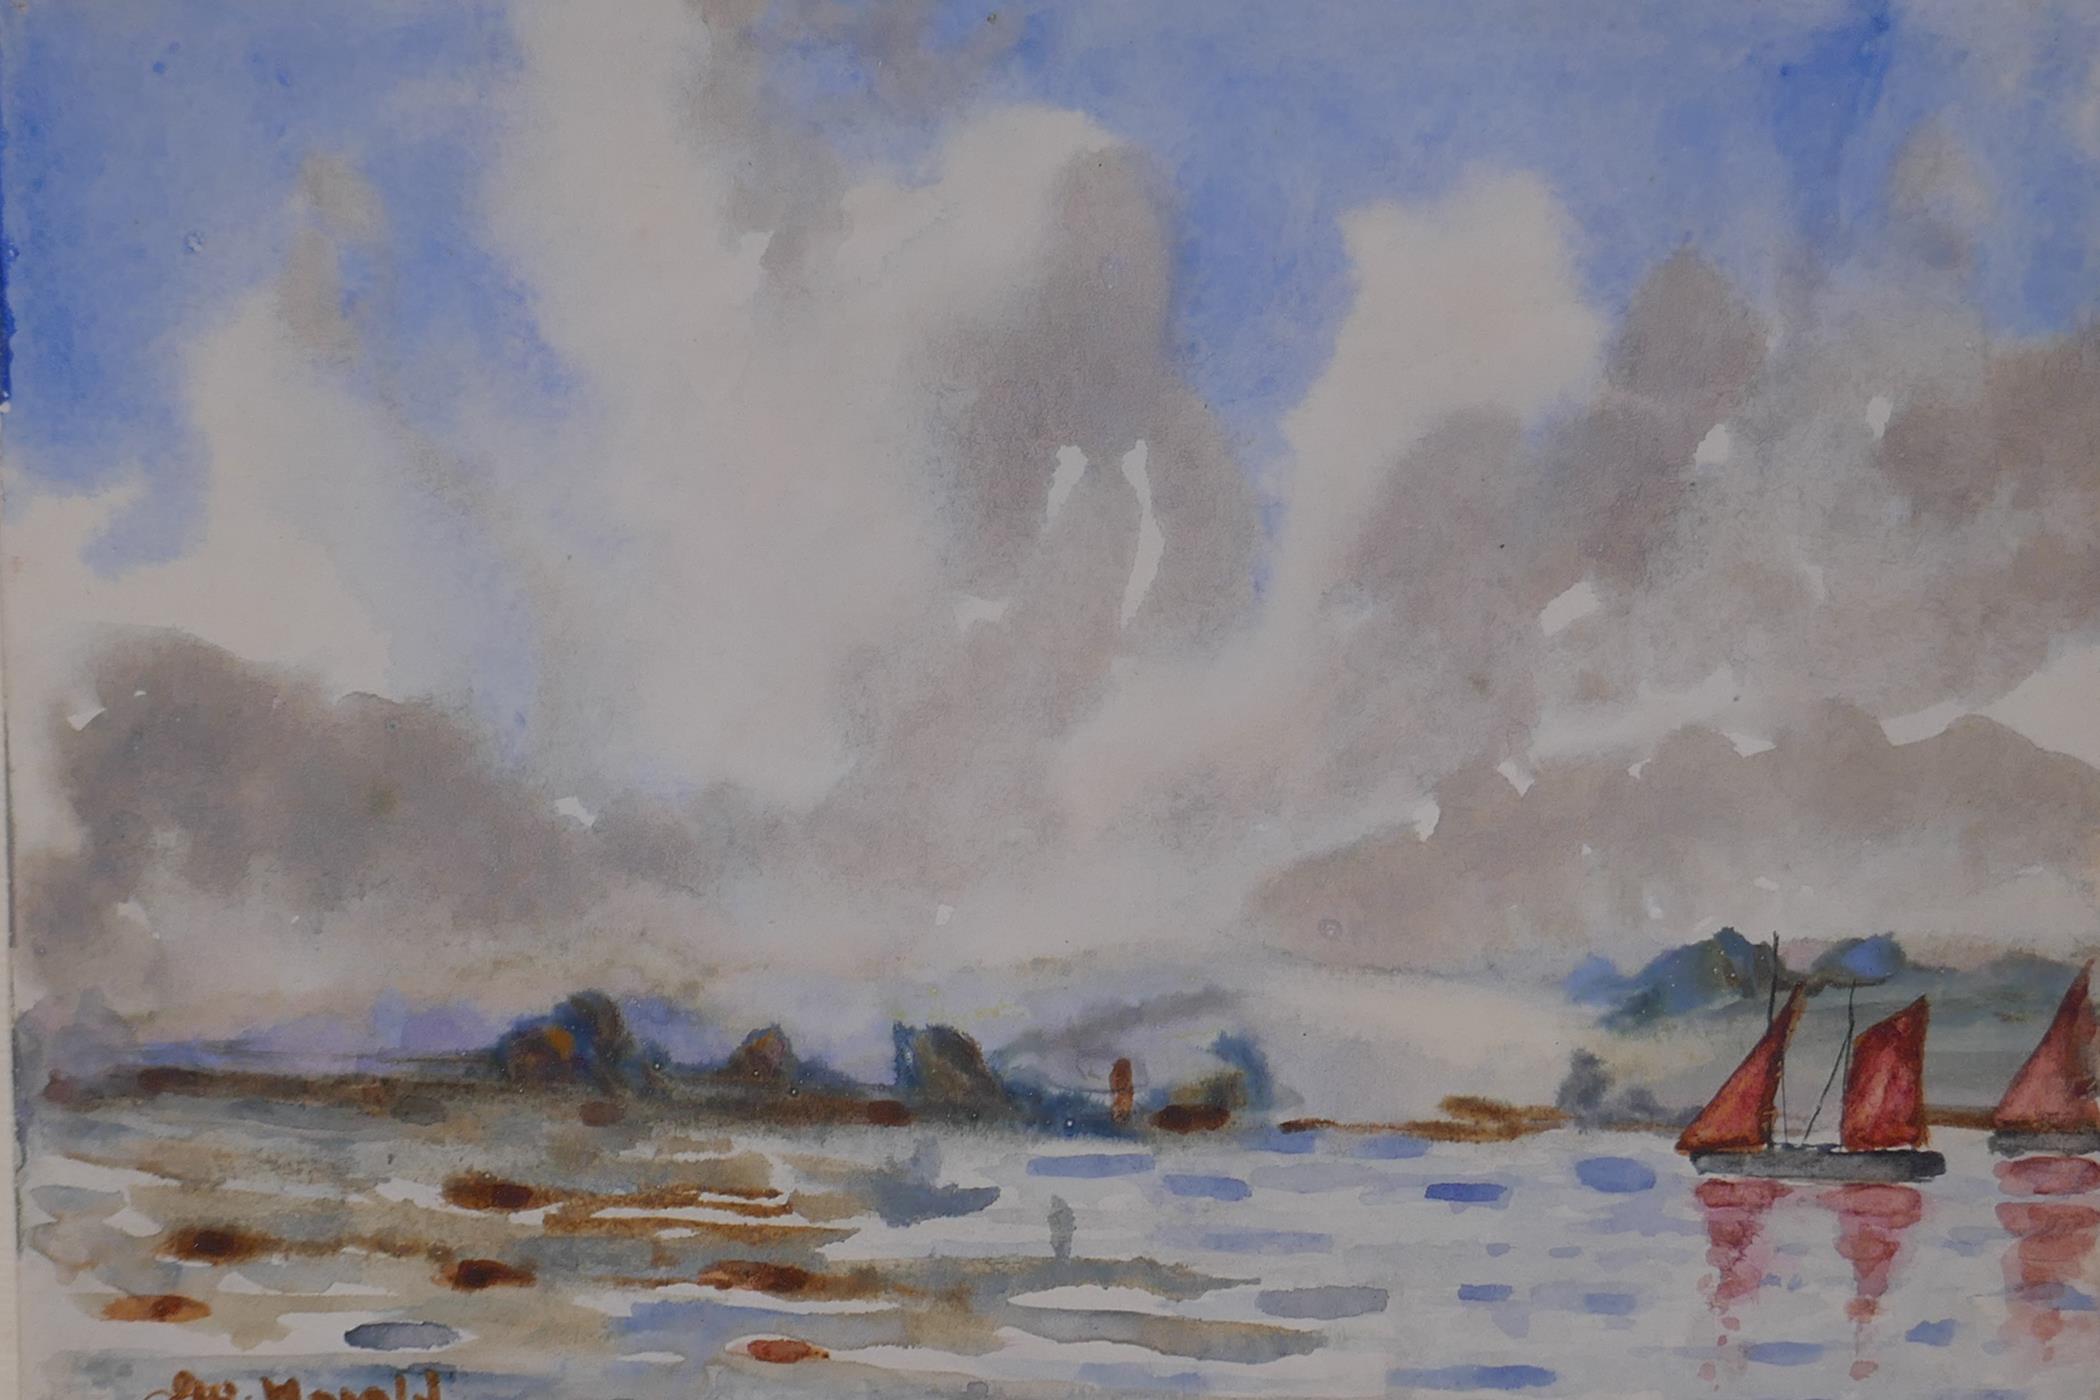 Watercolour sketch of boats in a coastal inlet, signed J.W. Herald, 18 x 25cm